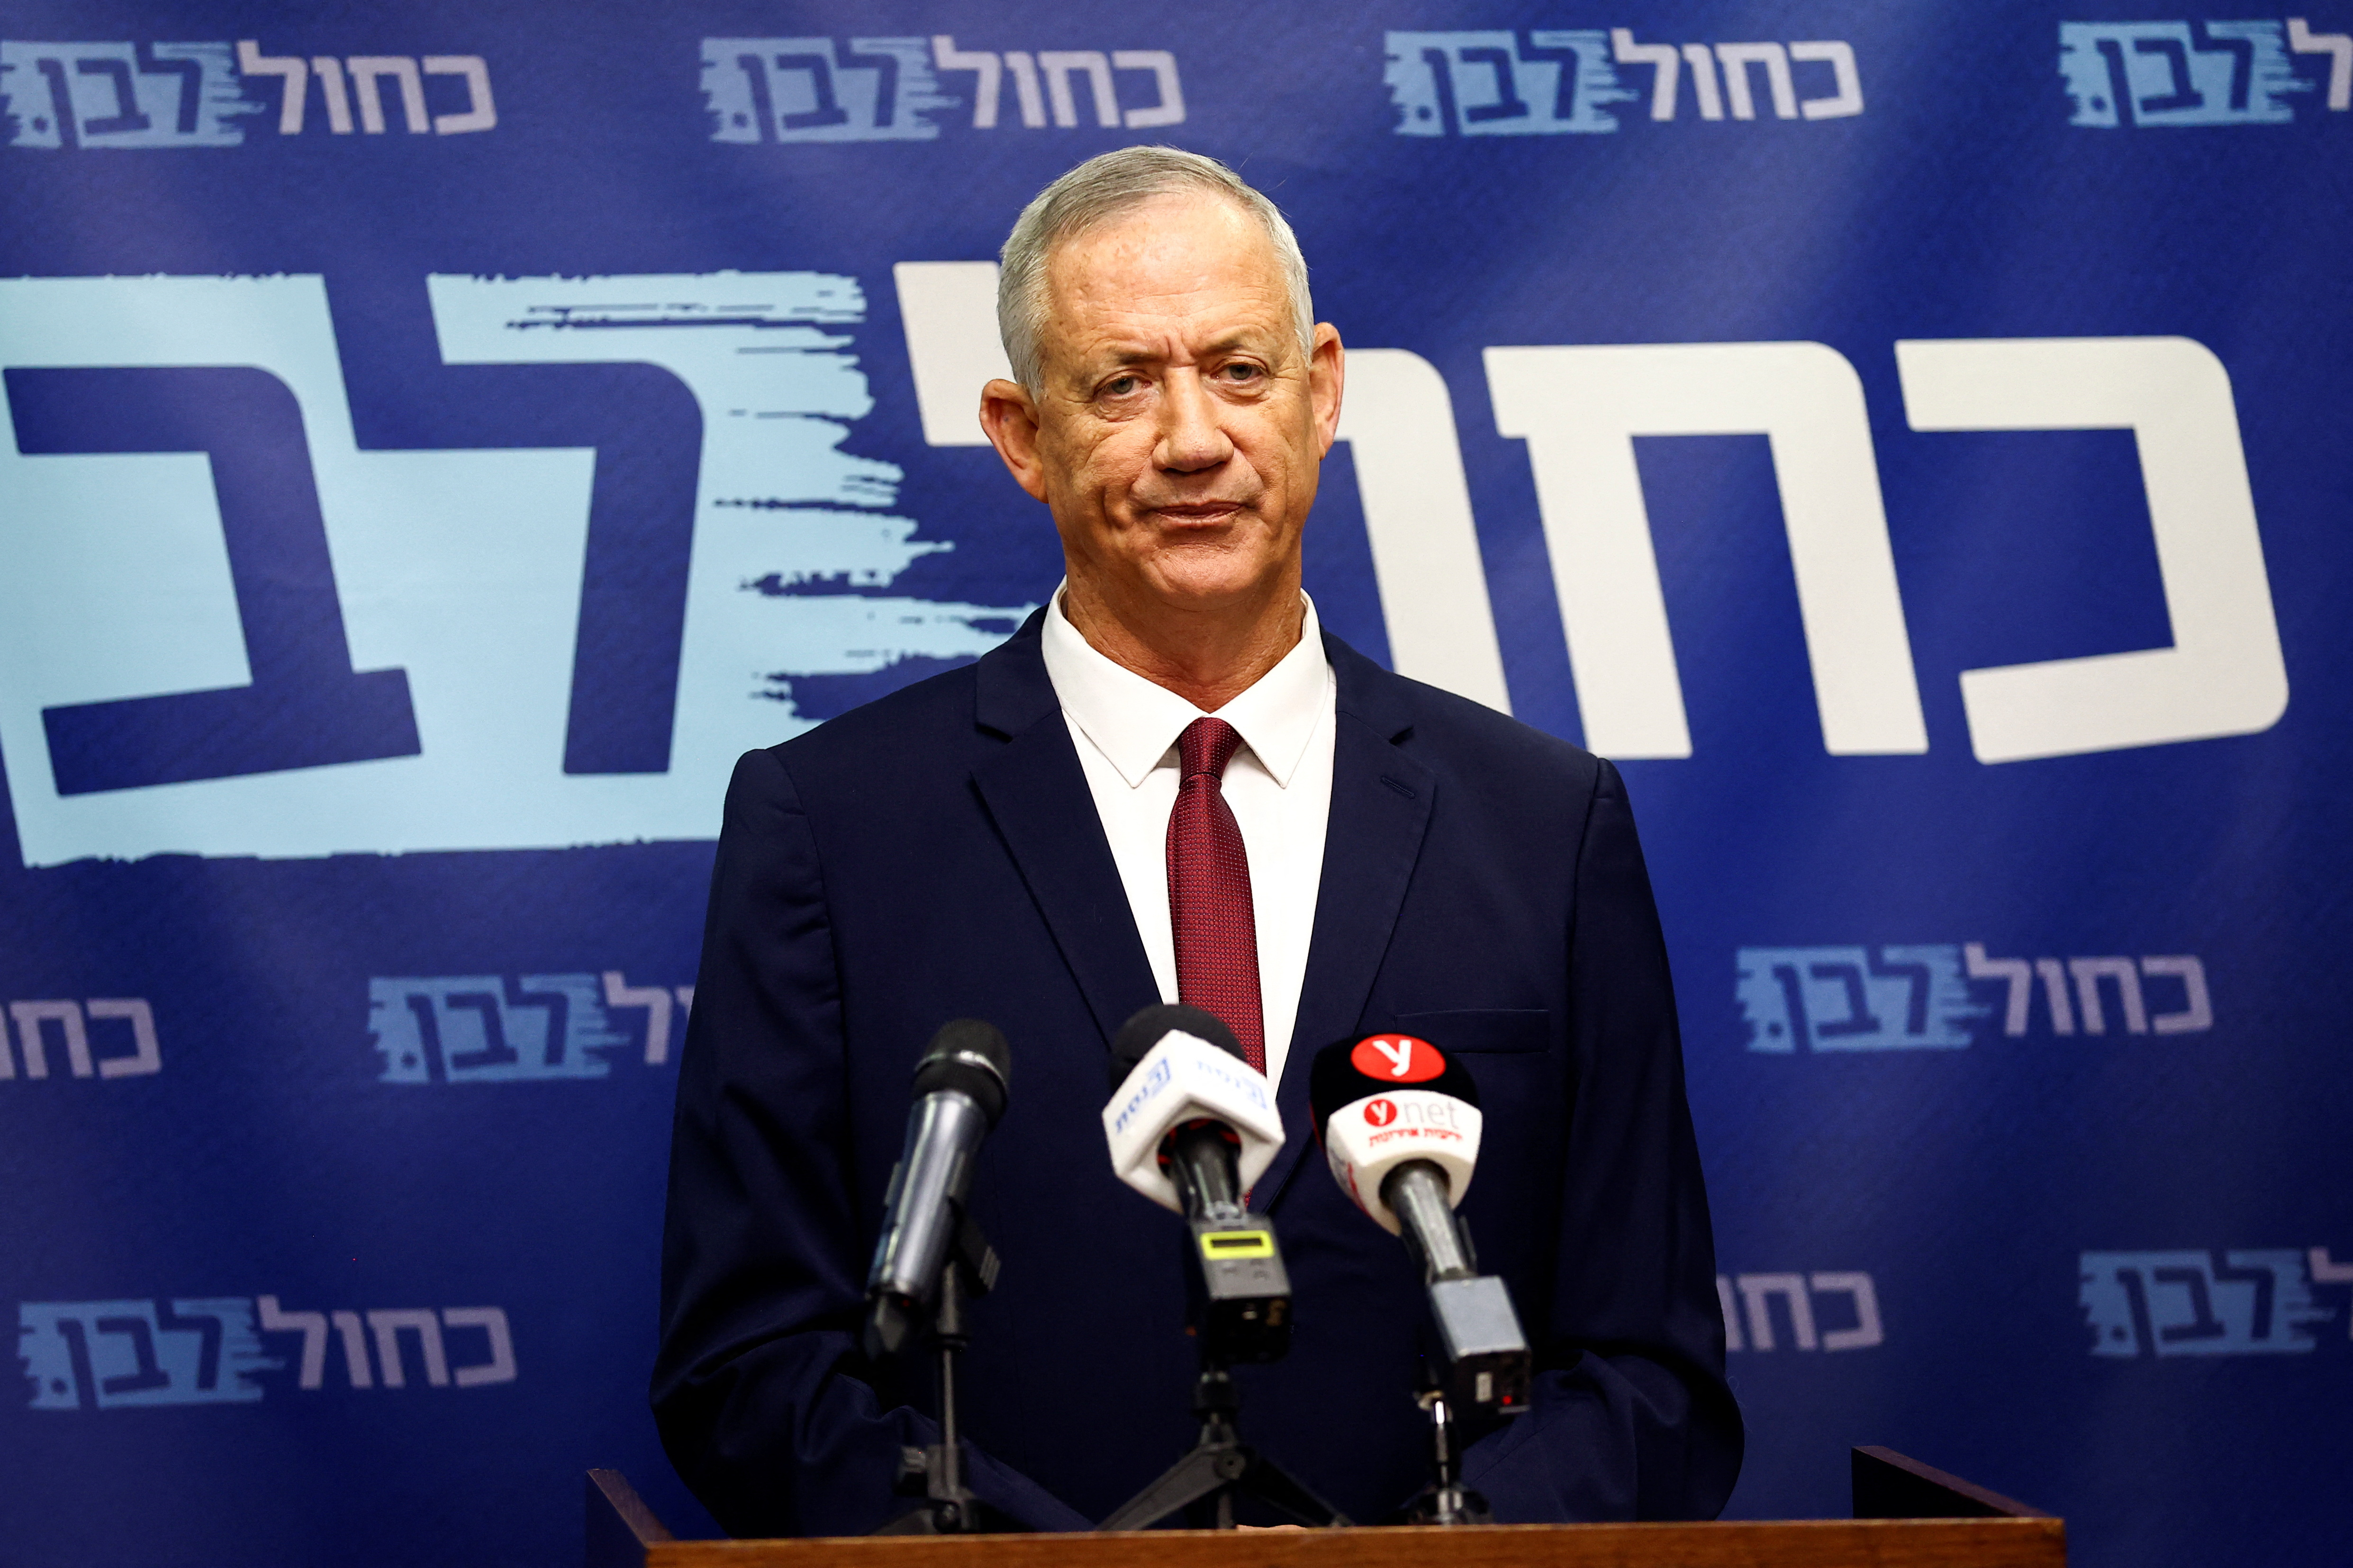 Israeli Defence Minister Gantz attends his party's meeting at the Knesset, Israeli parliament in Jerusalem